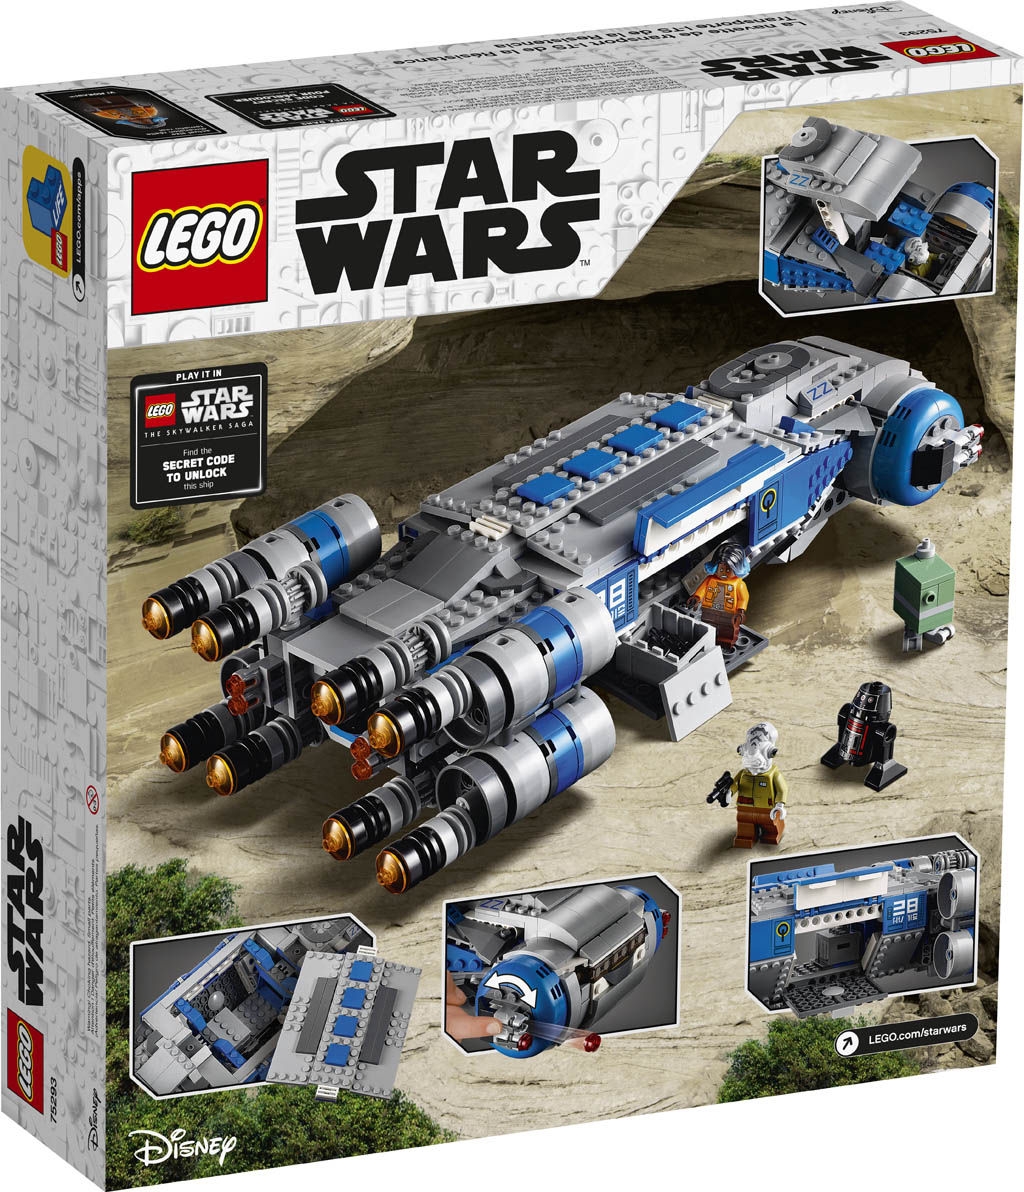 LEGO Star Wars Summer Sets Officially Announced The Brick Fan